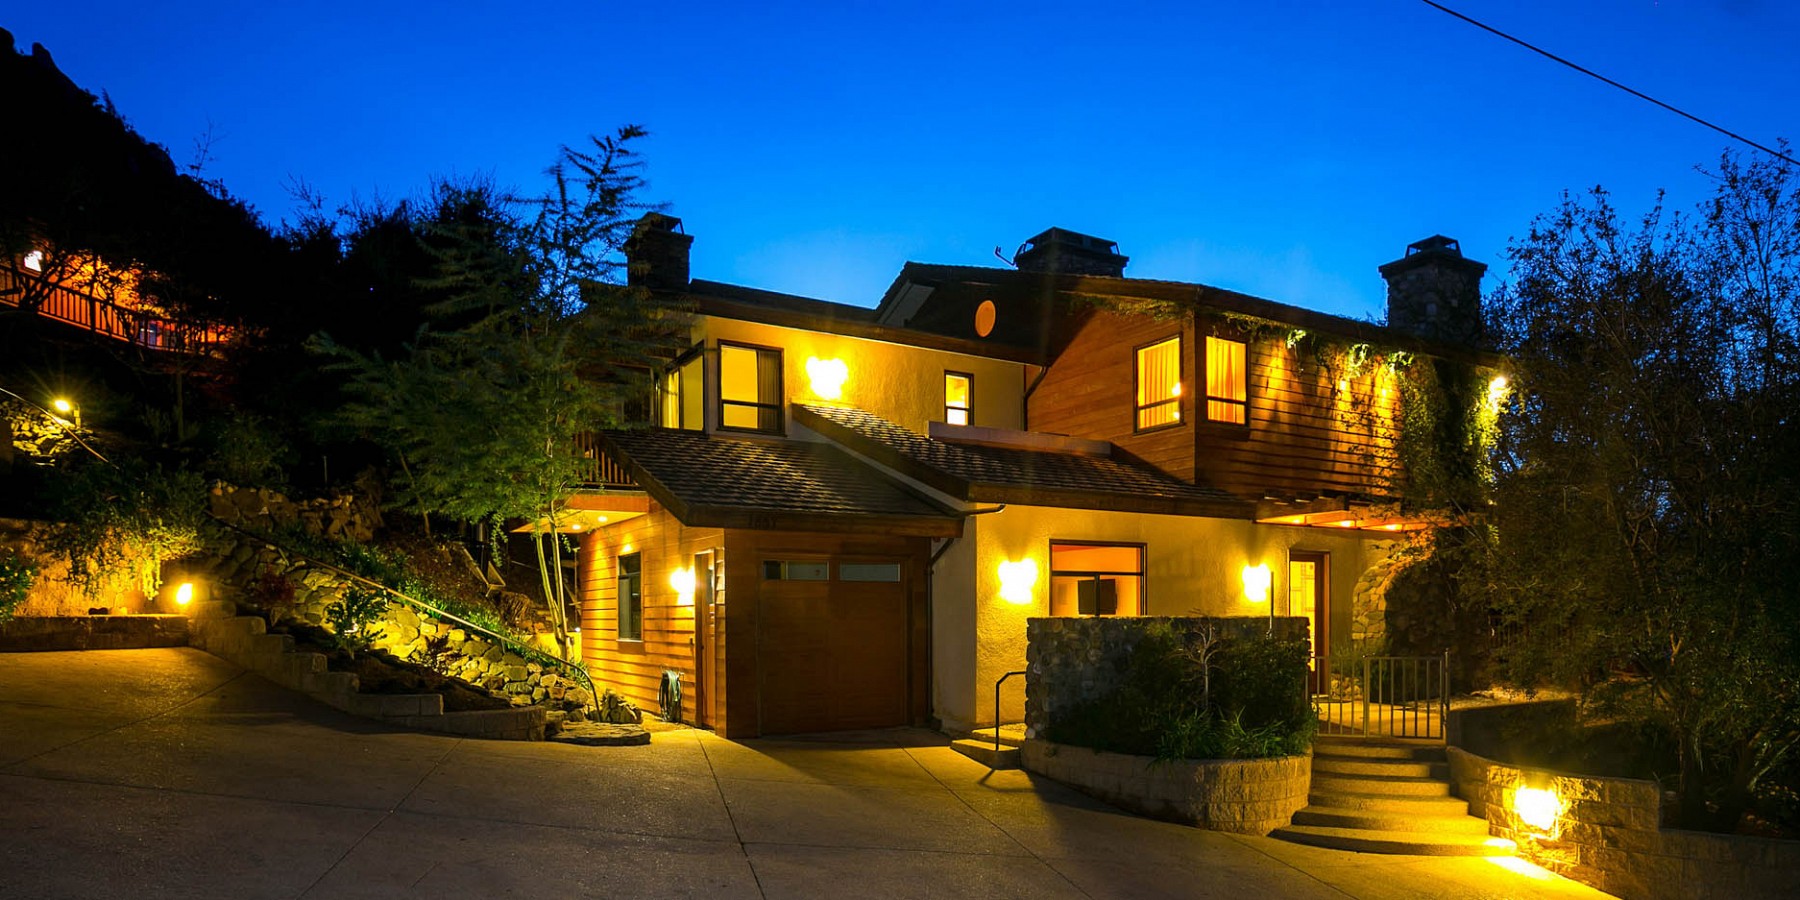 1857 Lookout Drive, Agoura, CA 91301